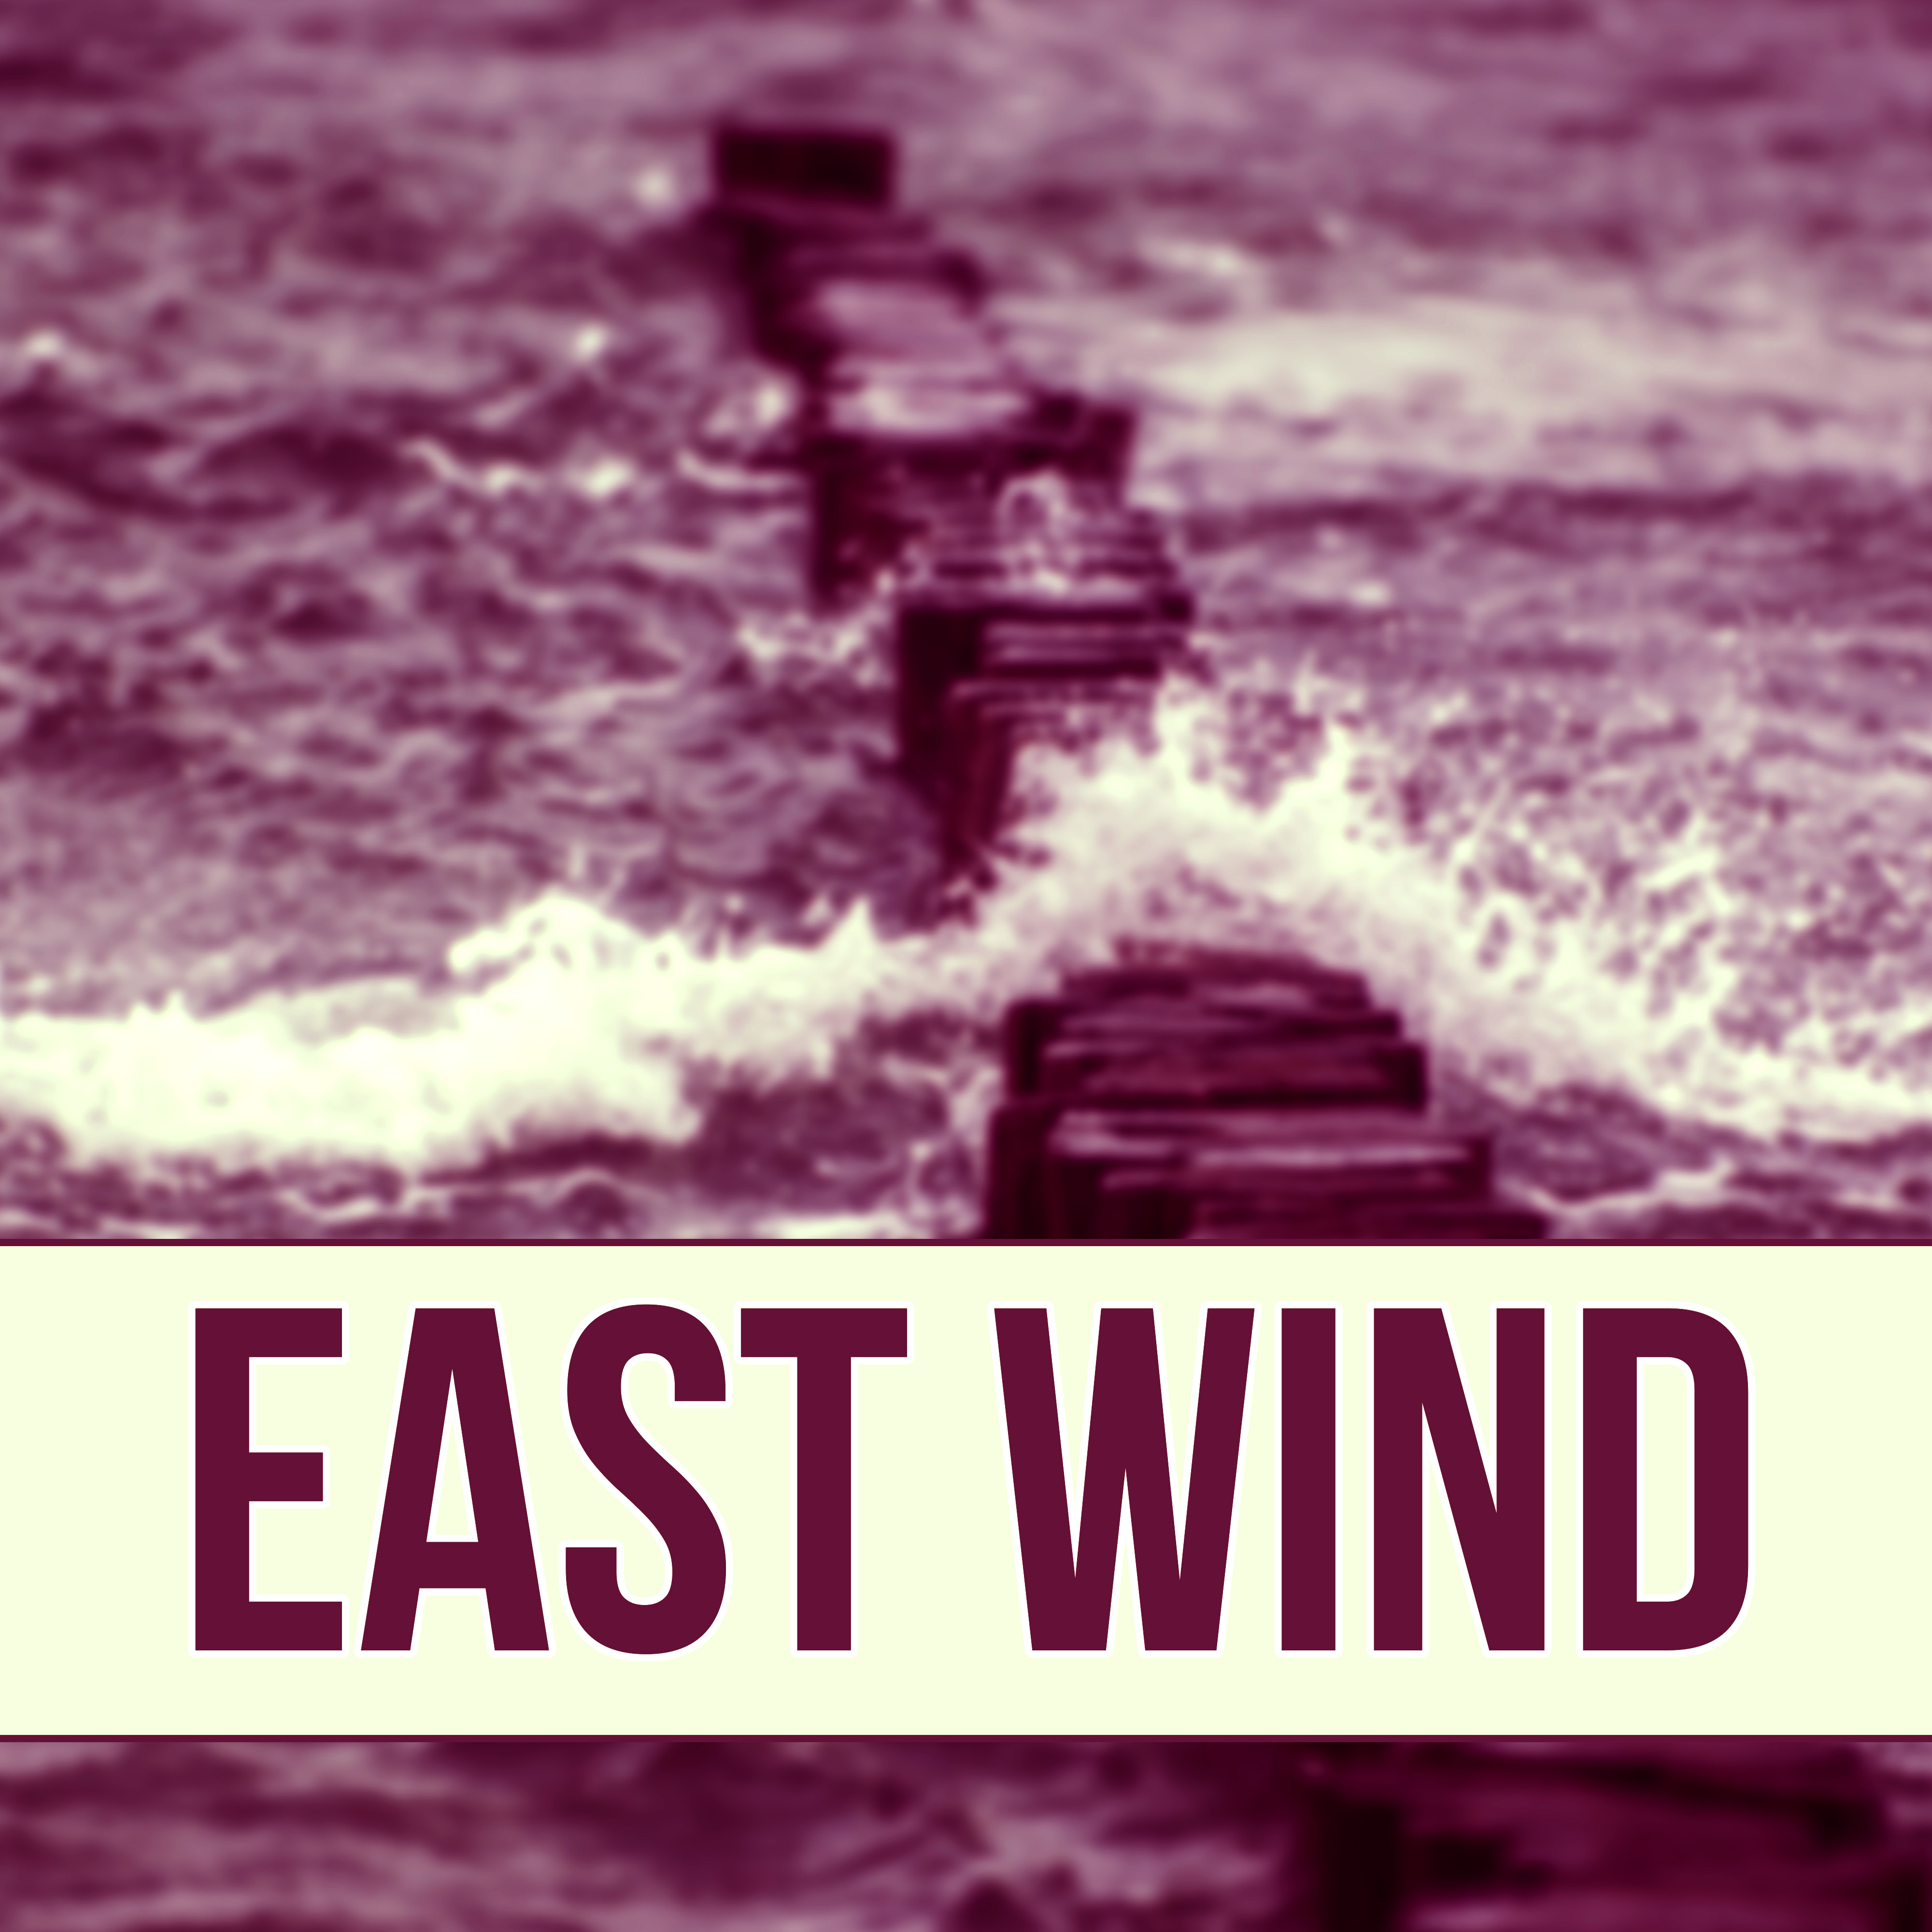 East Wind - In Harmony with Nature Sounds, Pacific Ocean Waves for Well Being and Healthy Lifestyle